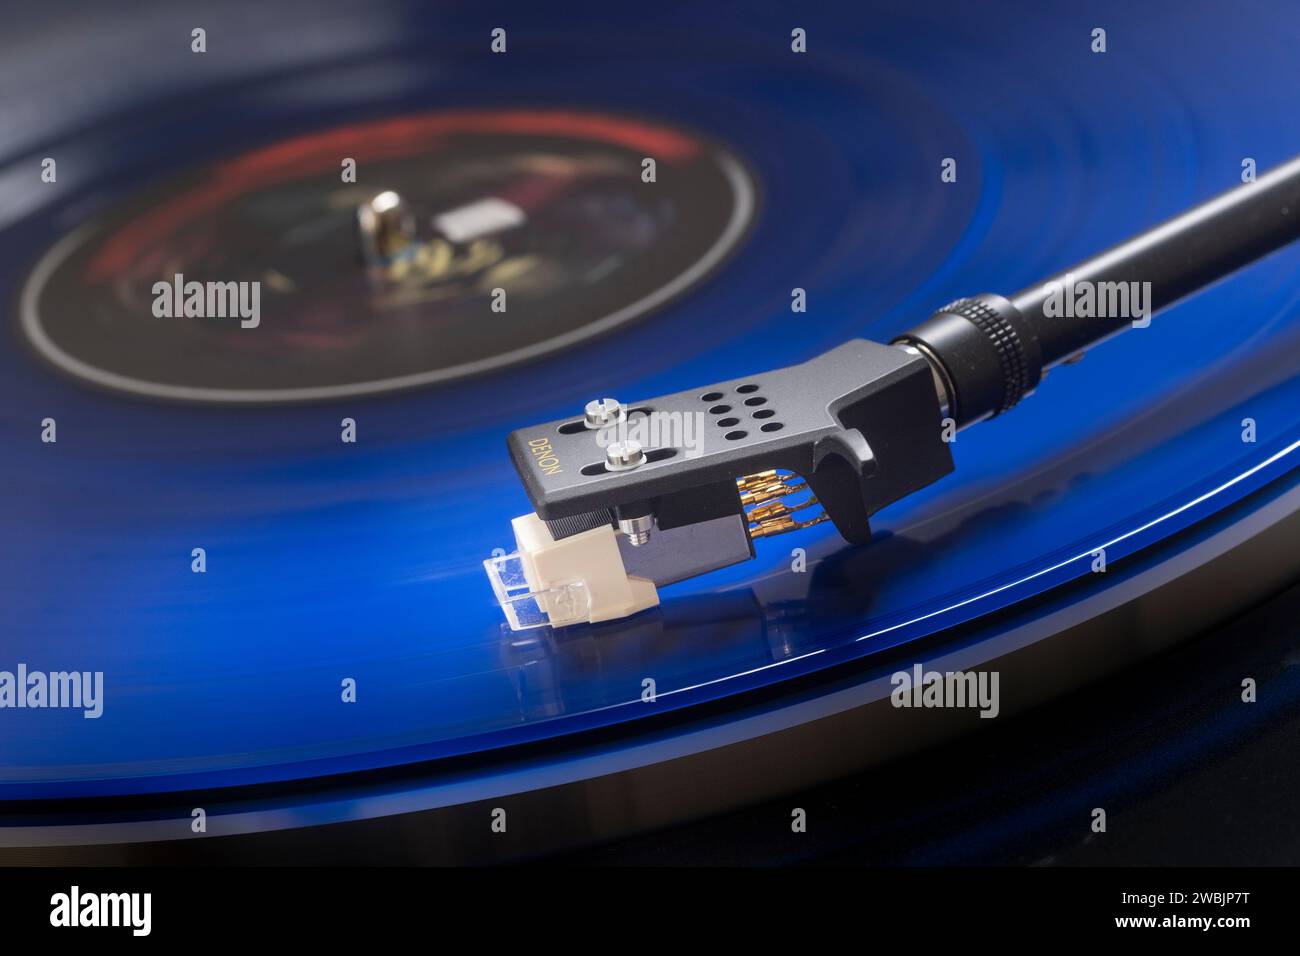 Record player with a blue long-playing record Stock Photo